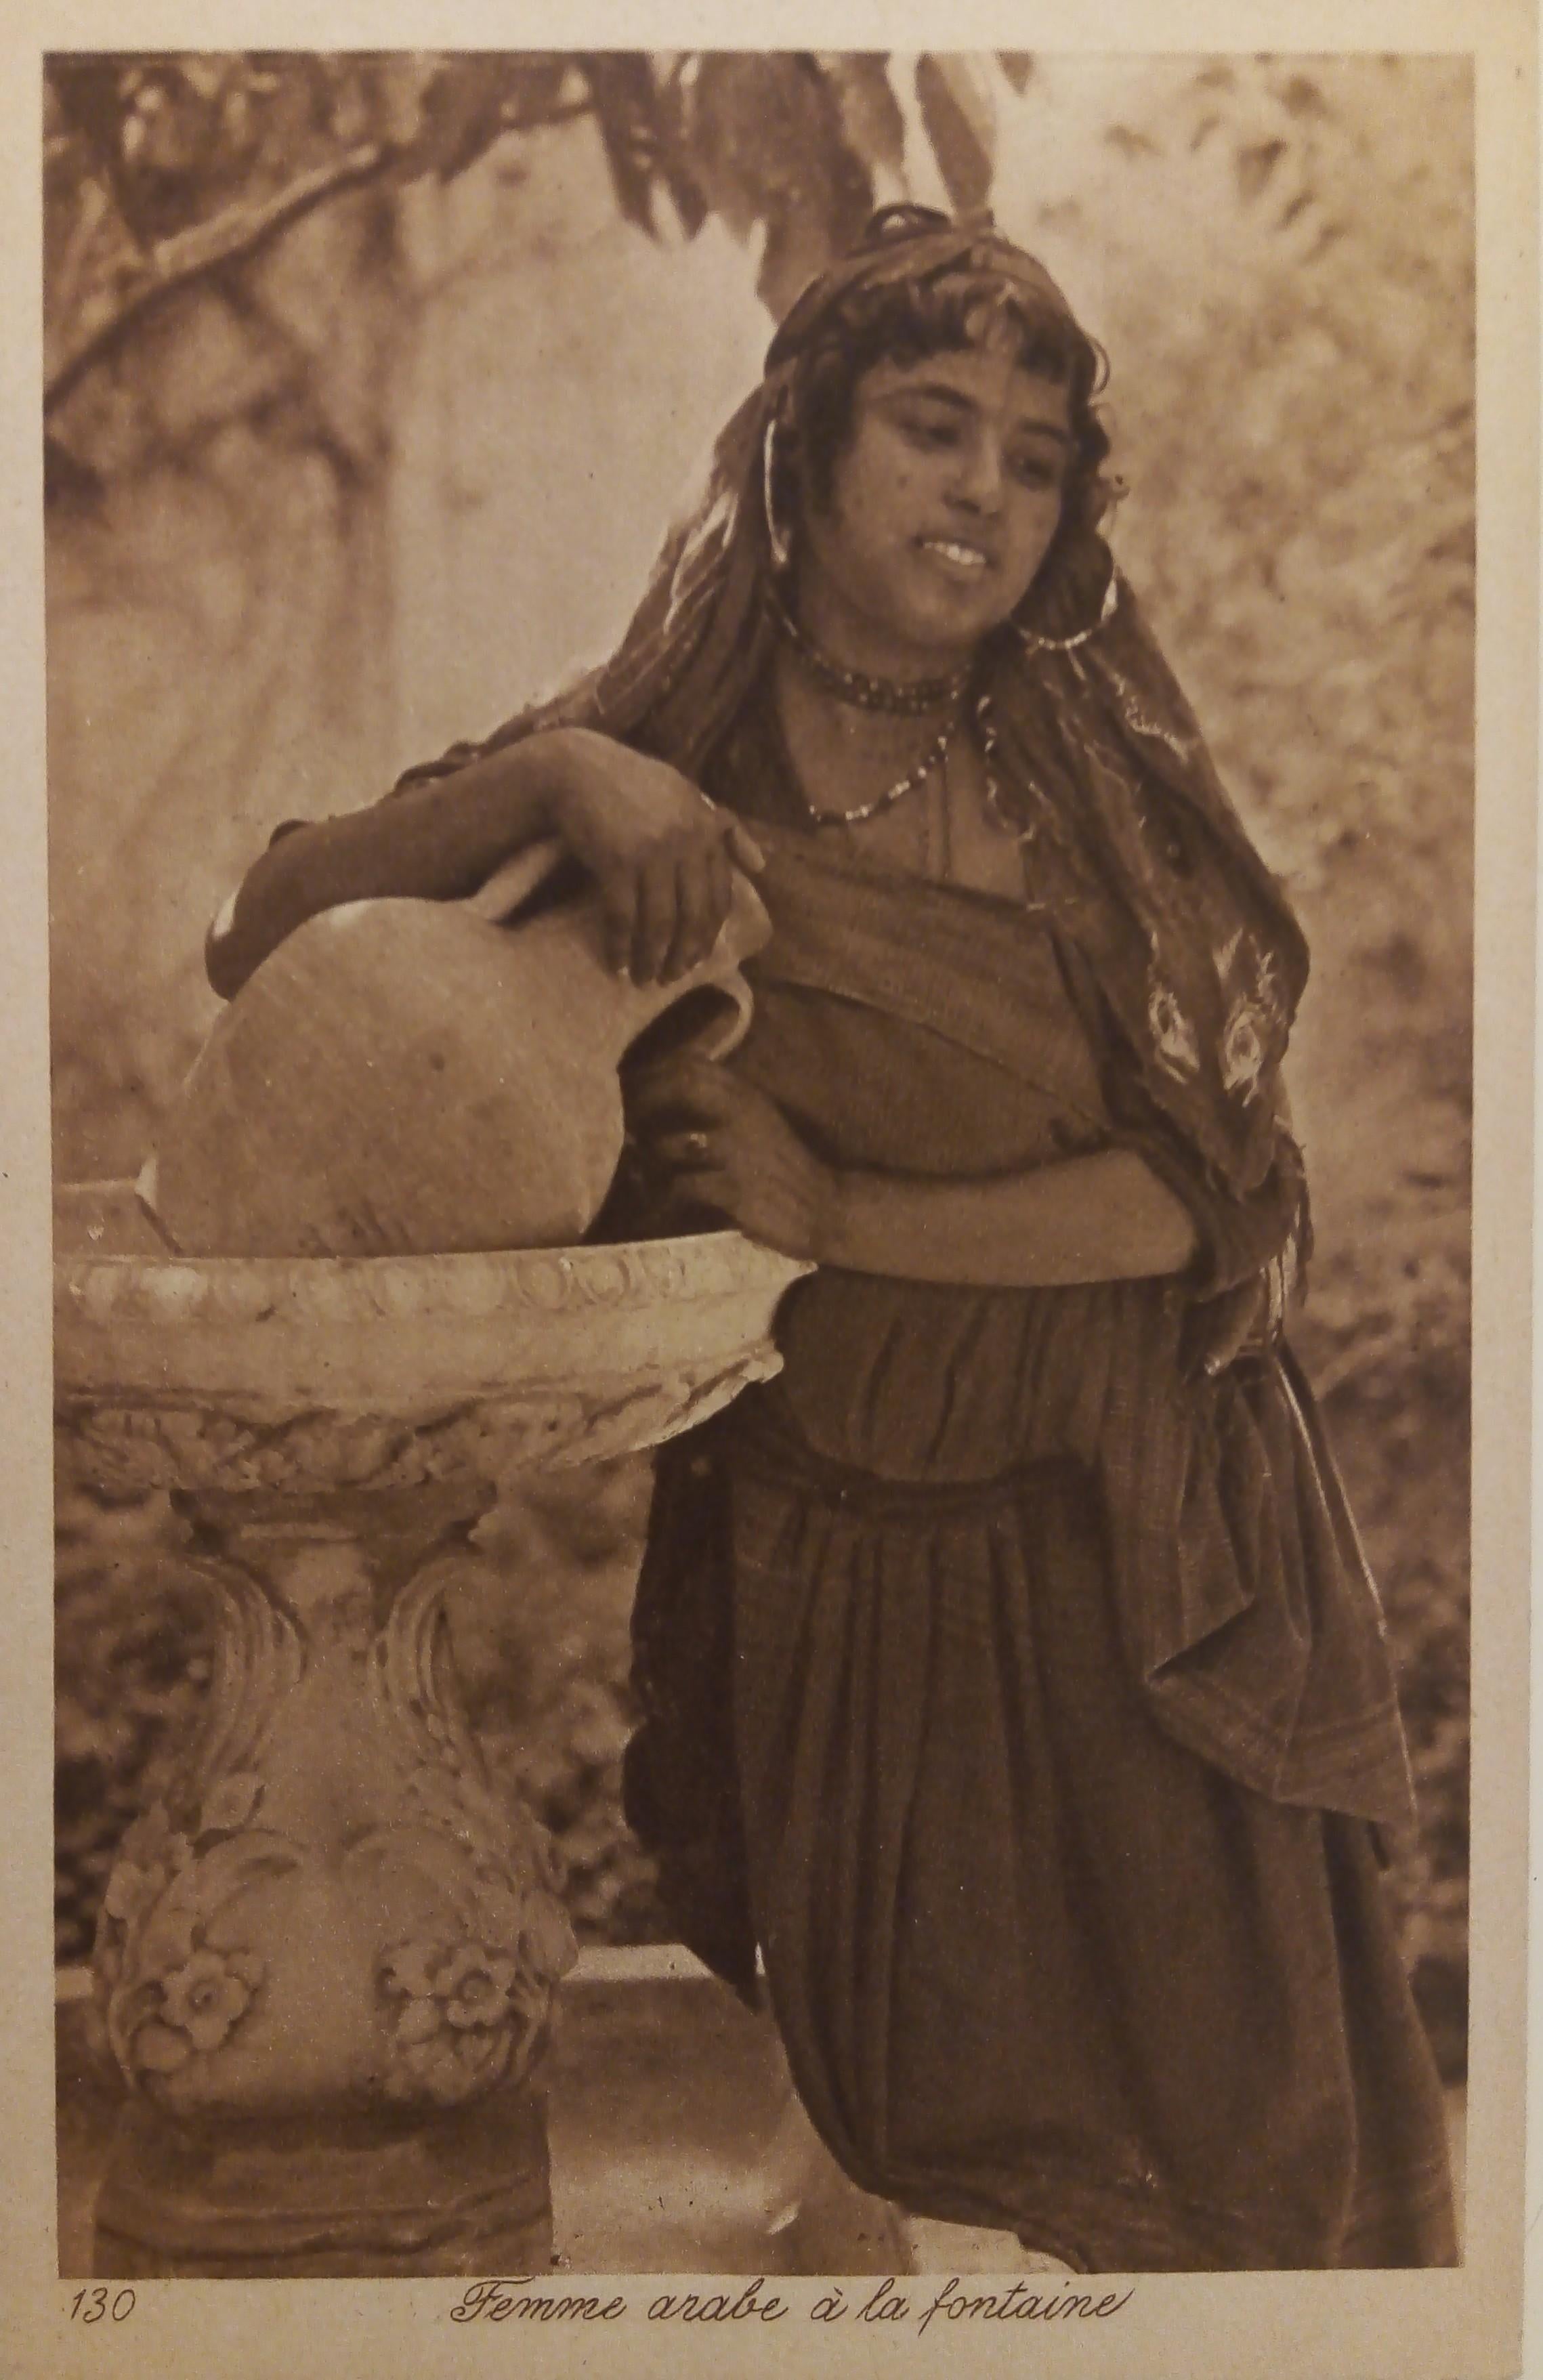 A beautiful Set of 20 Postcards with original photos of Arab cultures of North Africa created and commercialized by Lehnert & Landrock and signed 